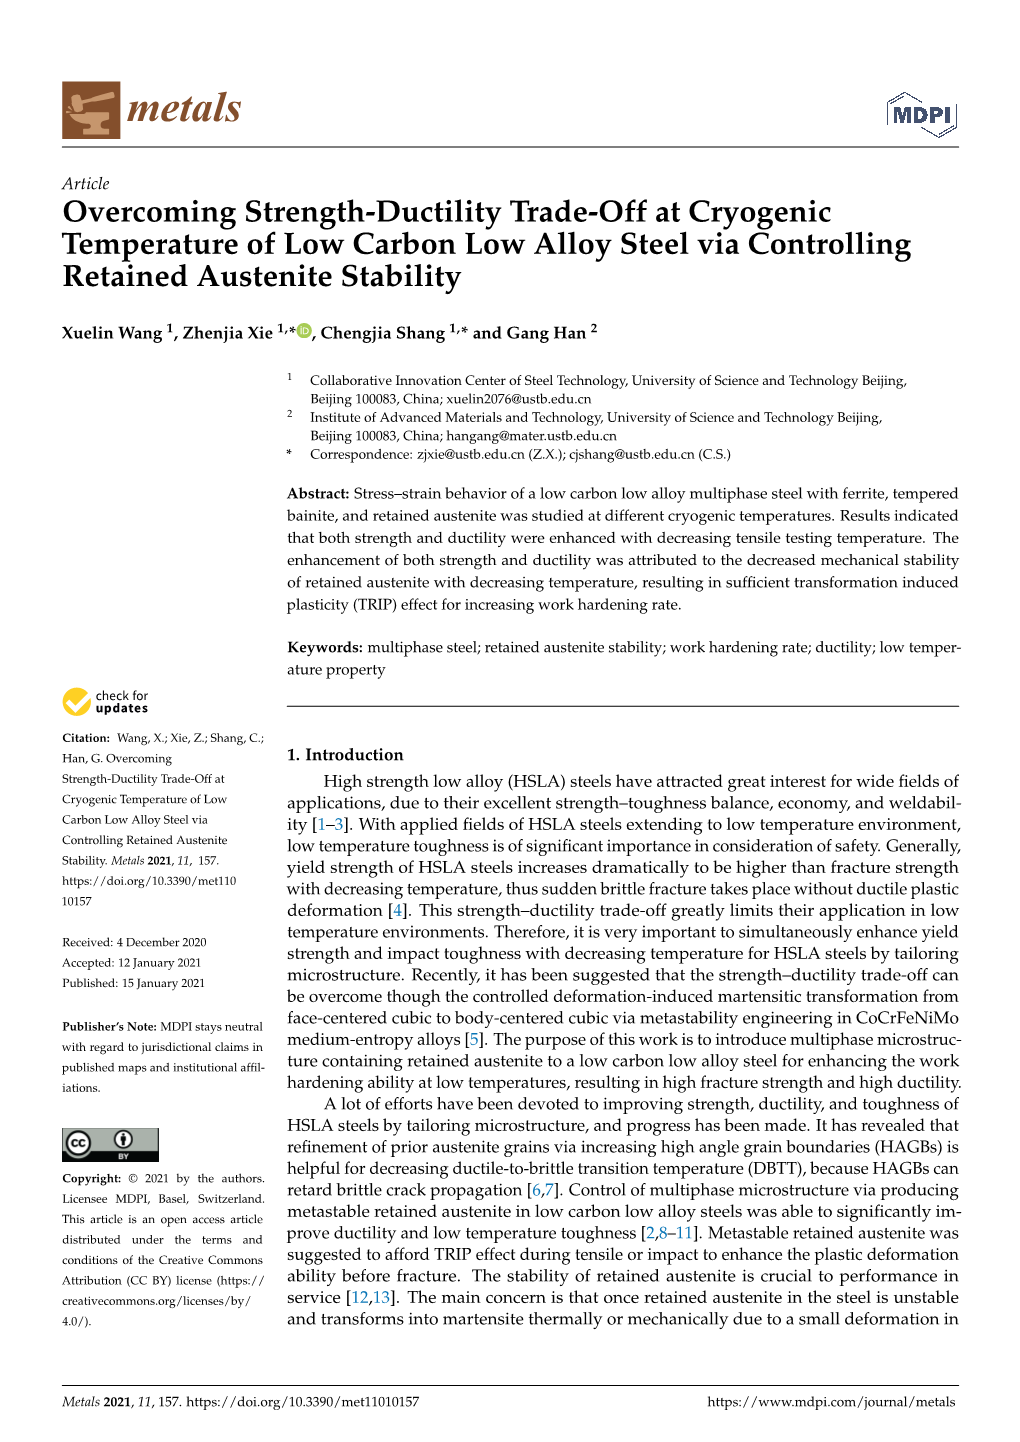 Overcoming Strength-Ductility Trade-Off at Cryogenic Temperature of Low Carbon Low Alloy Steel Via Controlling Retained Austenite Stability